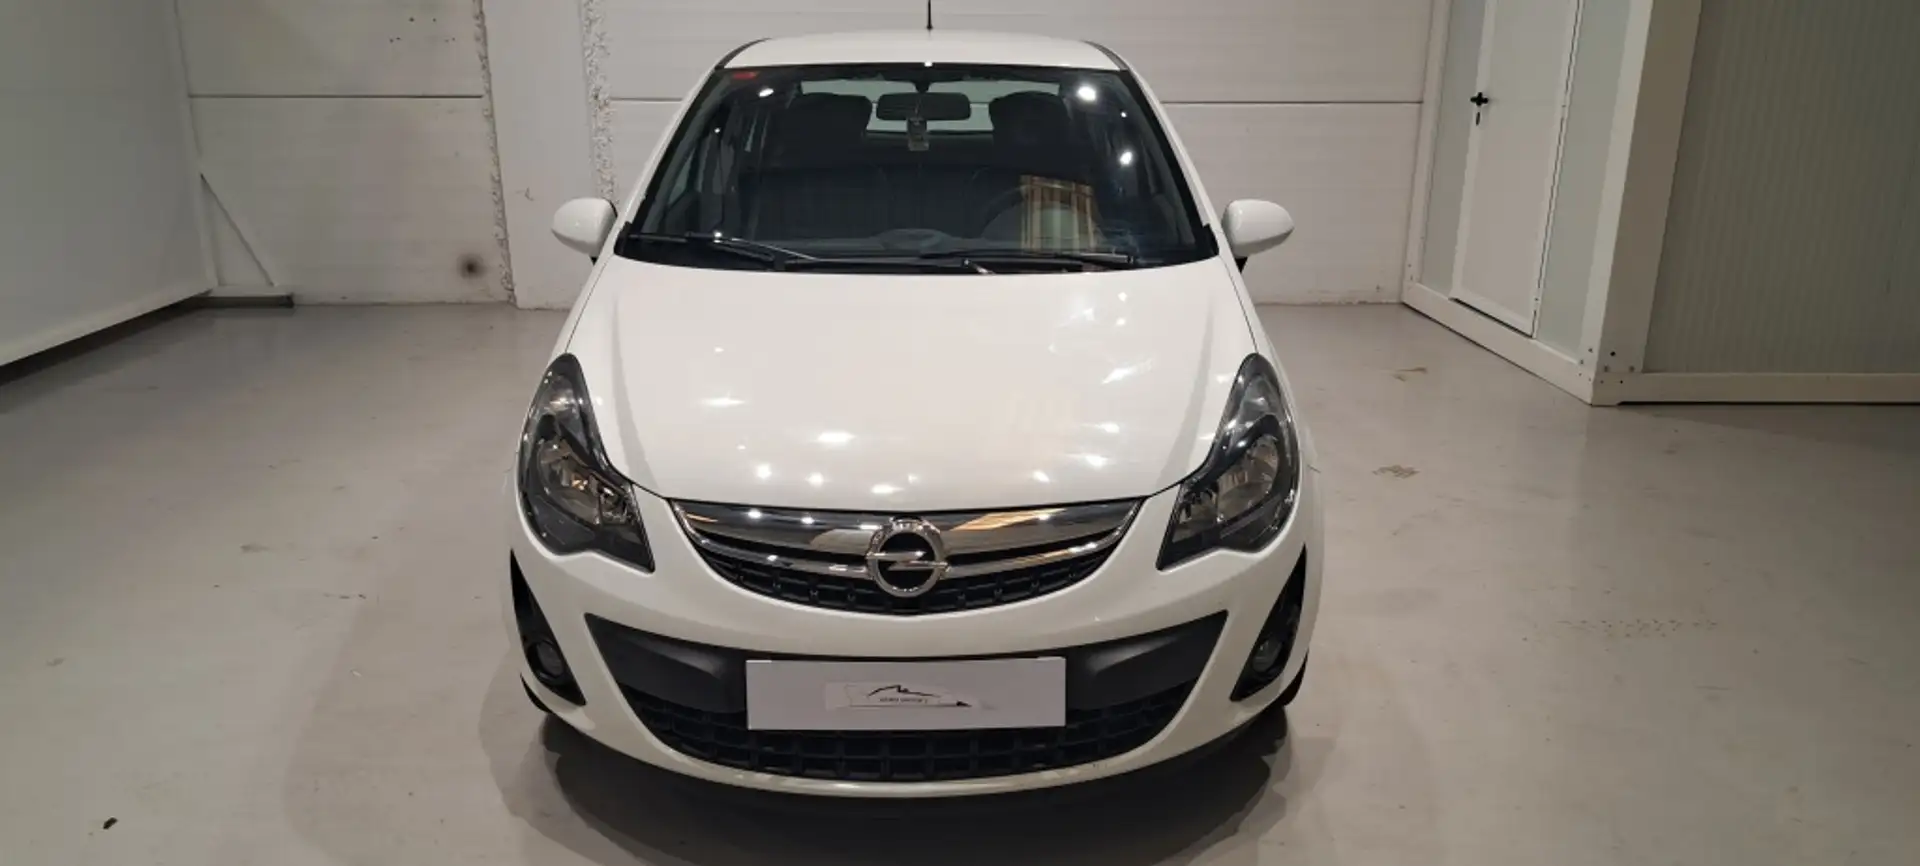 Opel Corsa 1.4 Color Edition S&S (4.75) Wit - 2